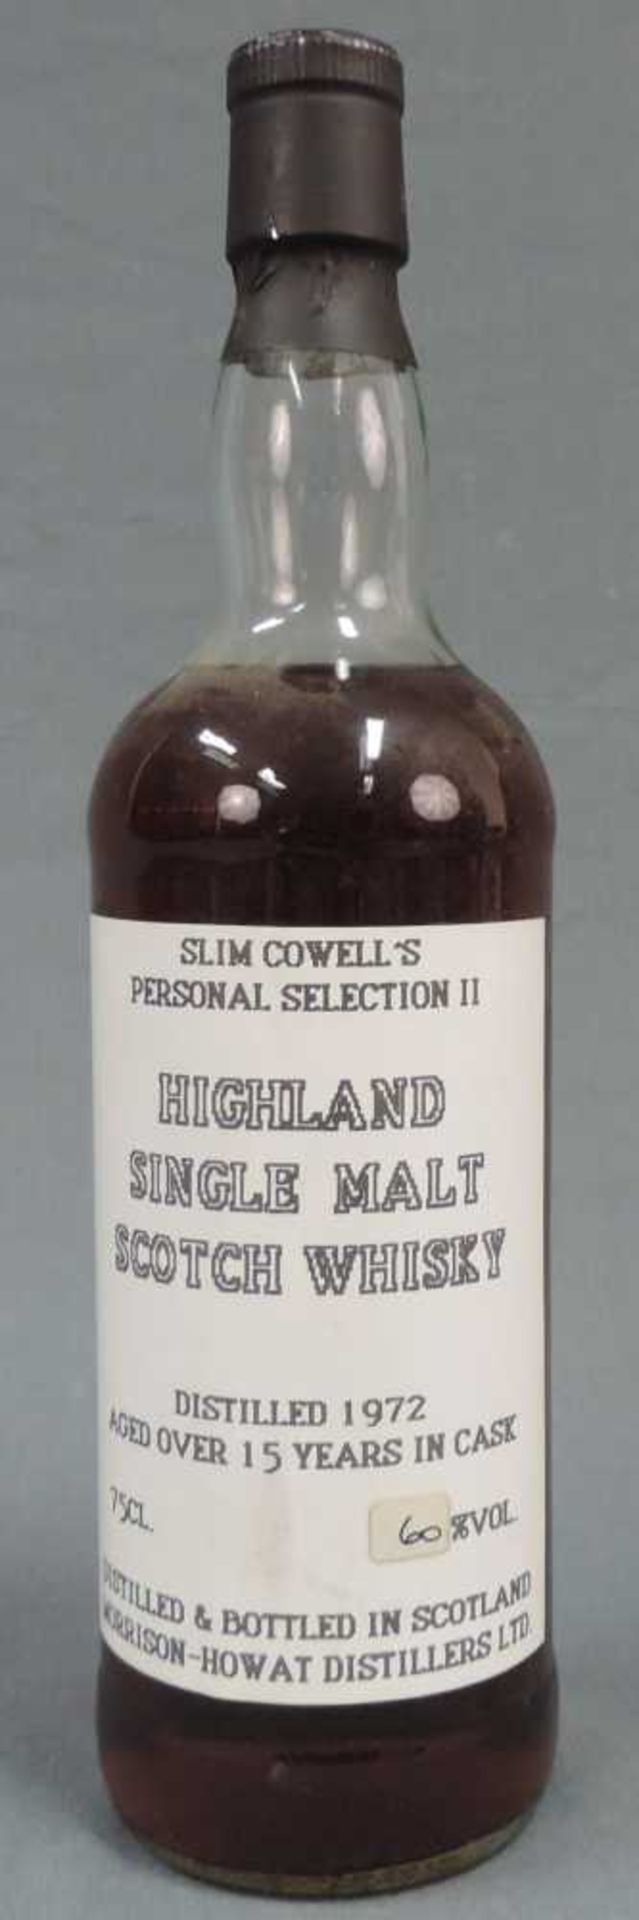 Slim Cowell’s Personal Selection II. Morrison - Howat. Highland Single Malt Scotch Whisky. 75cl.